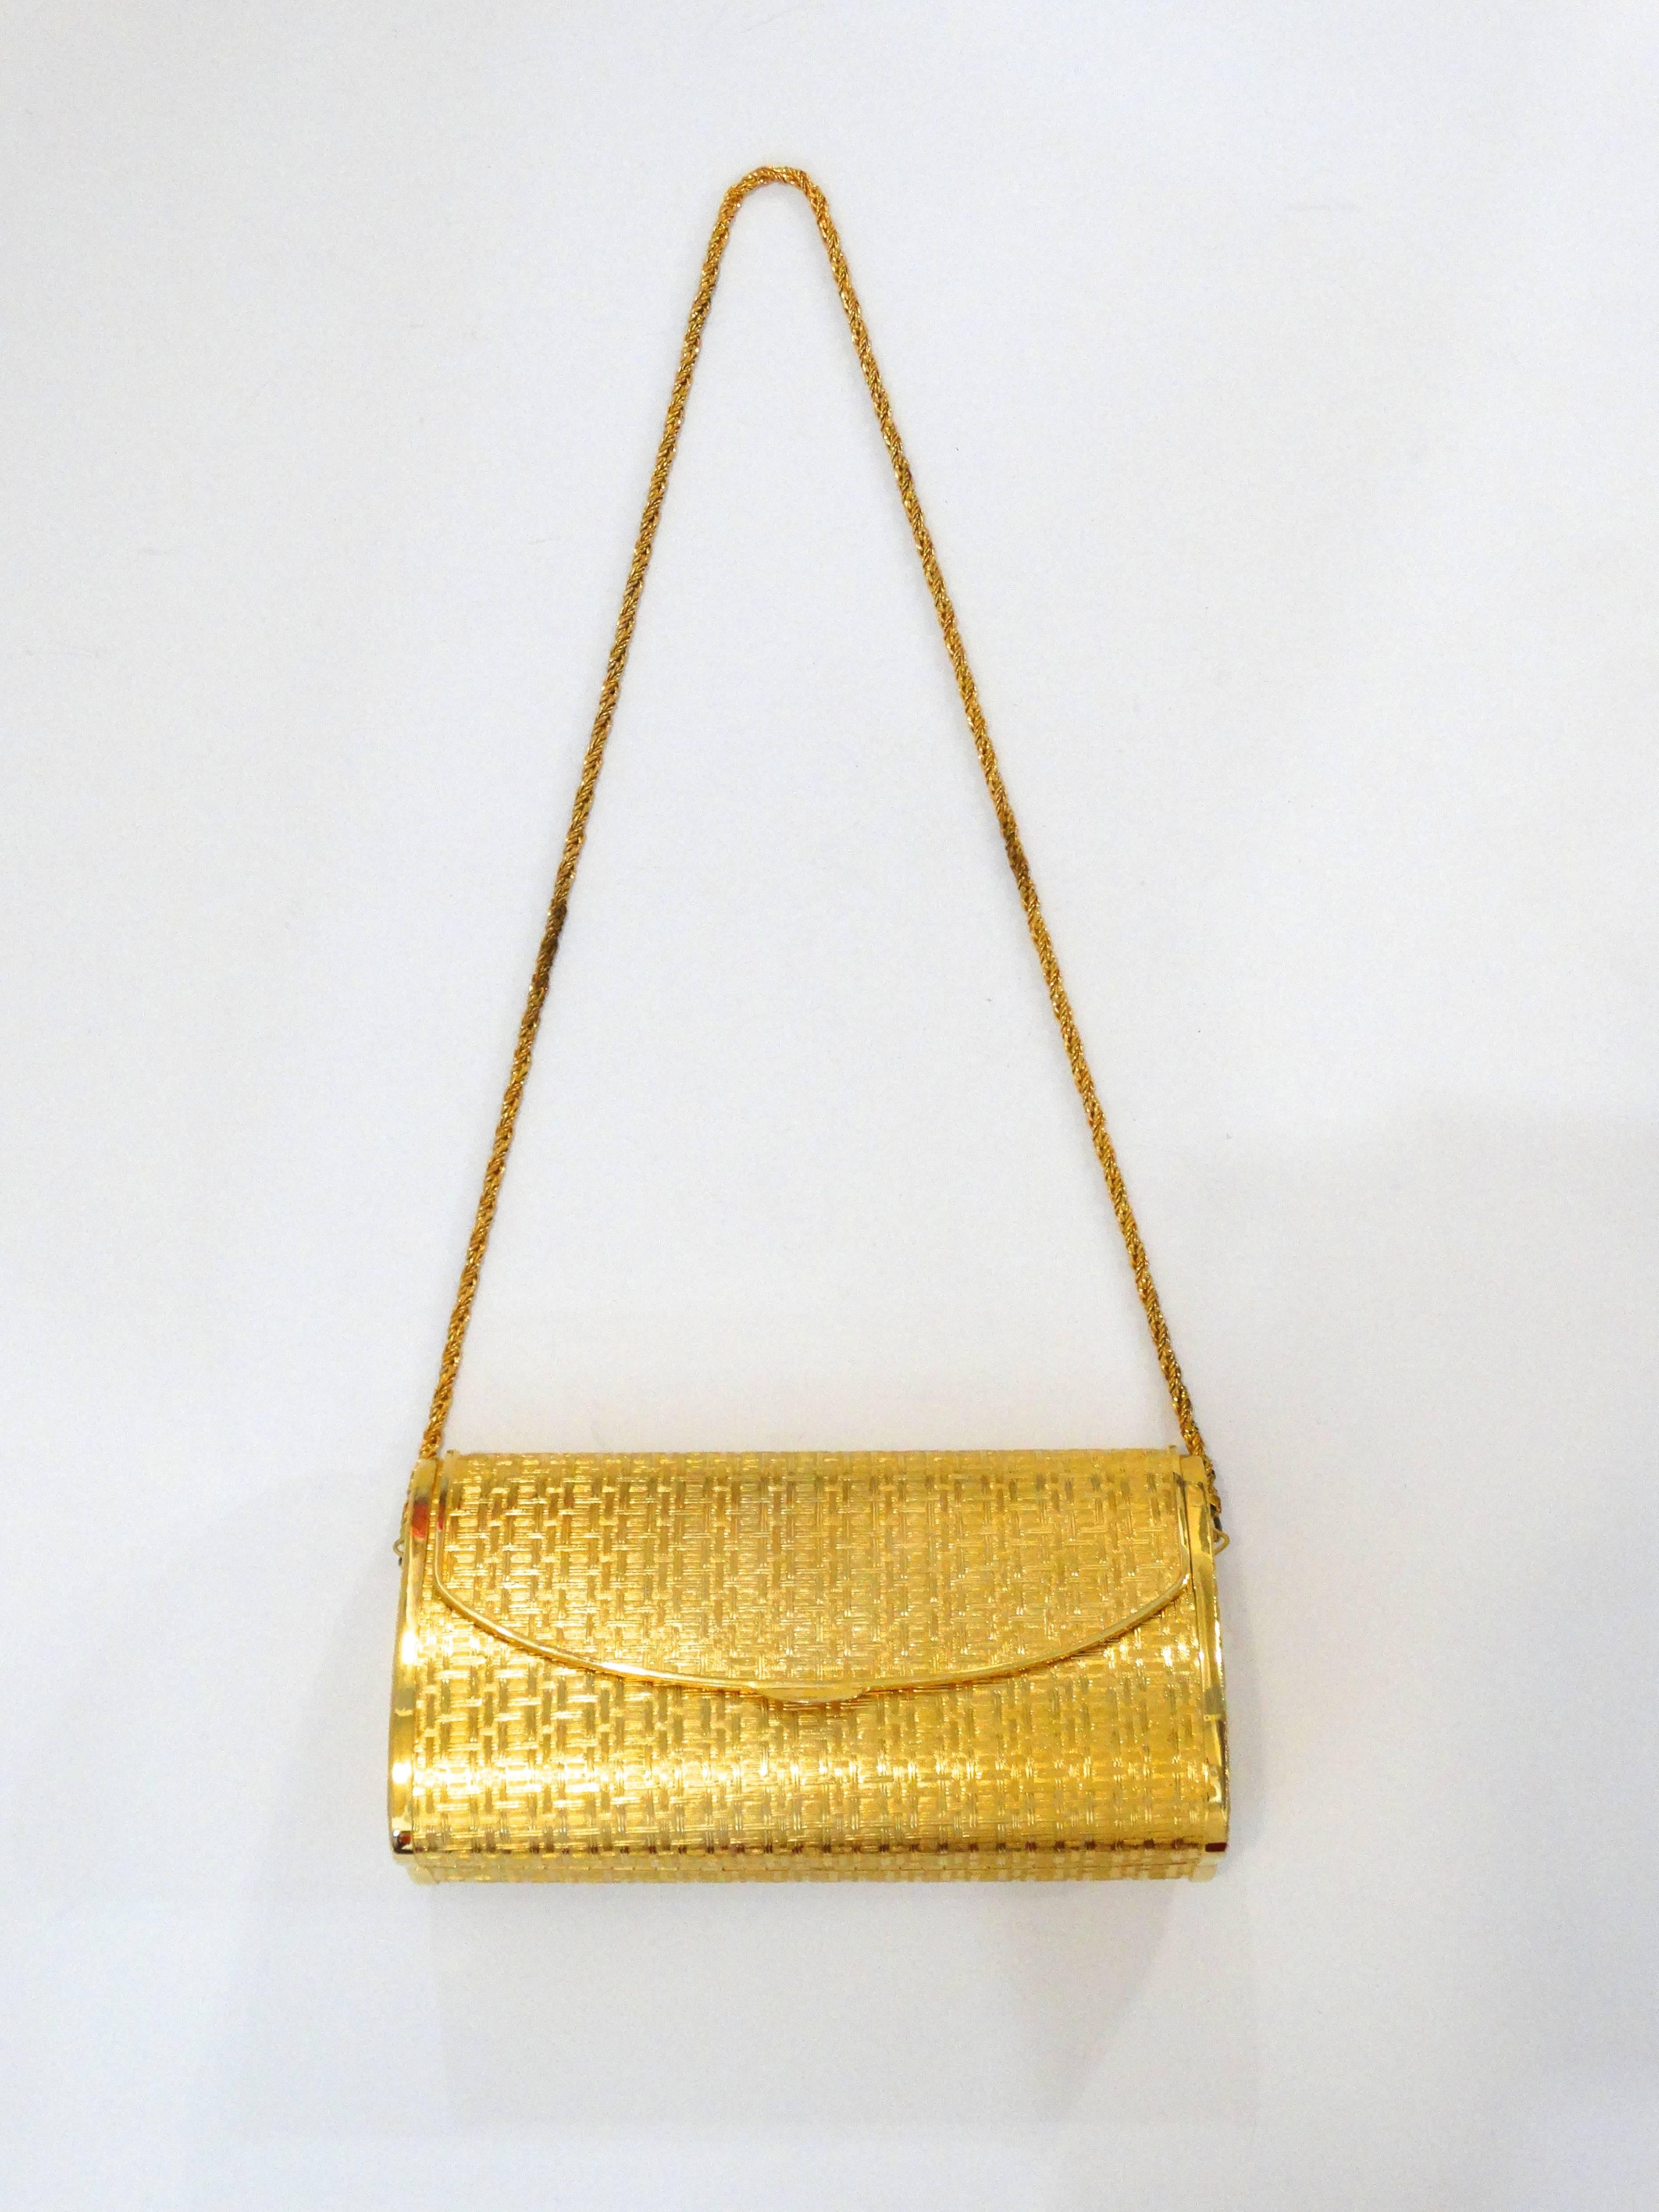 Take on the night with our incredible 1960s gold evening bag from Saks Fifth Avenue! Brushed gold metal with basket weave like texture embossed into it. Hard shell metal casing with soft fabric lined interior. Matching gold strap that is easily